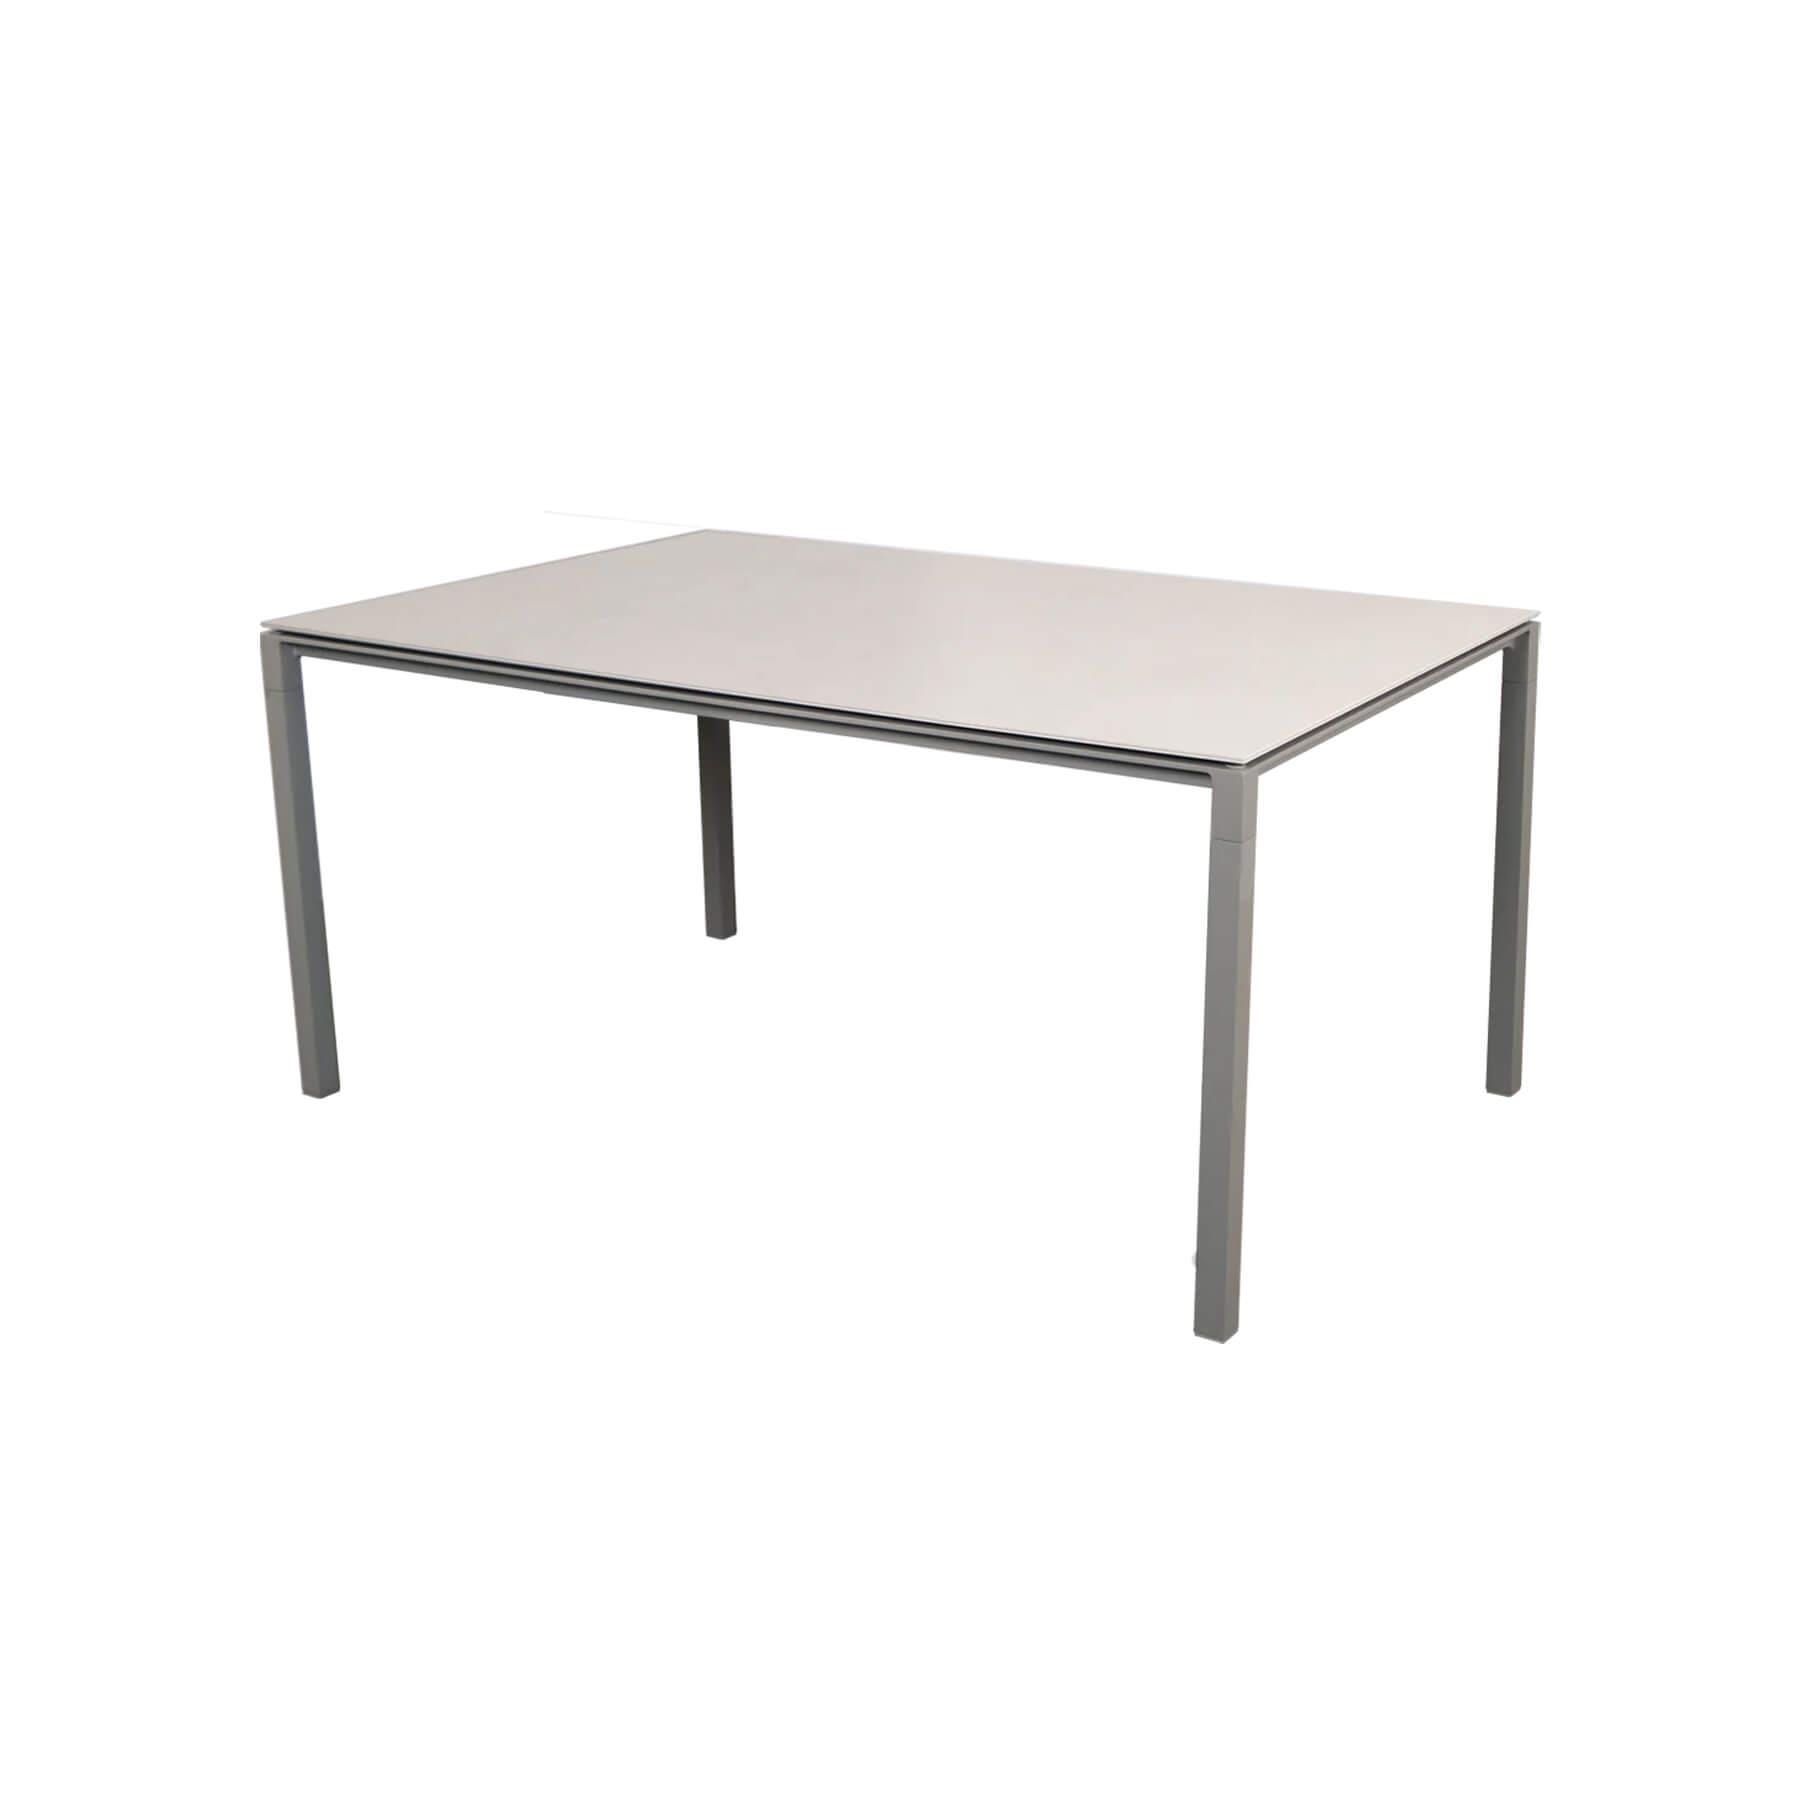 Caneline Pure Outdoor Dining Table Medium Ceramic Toscana Sand Top Taupe Legs Grey